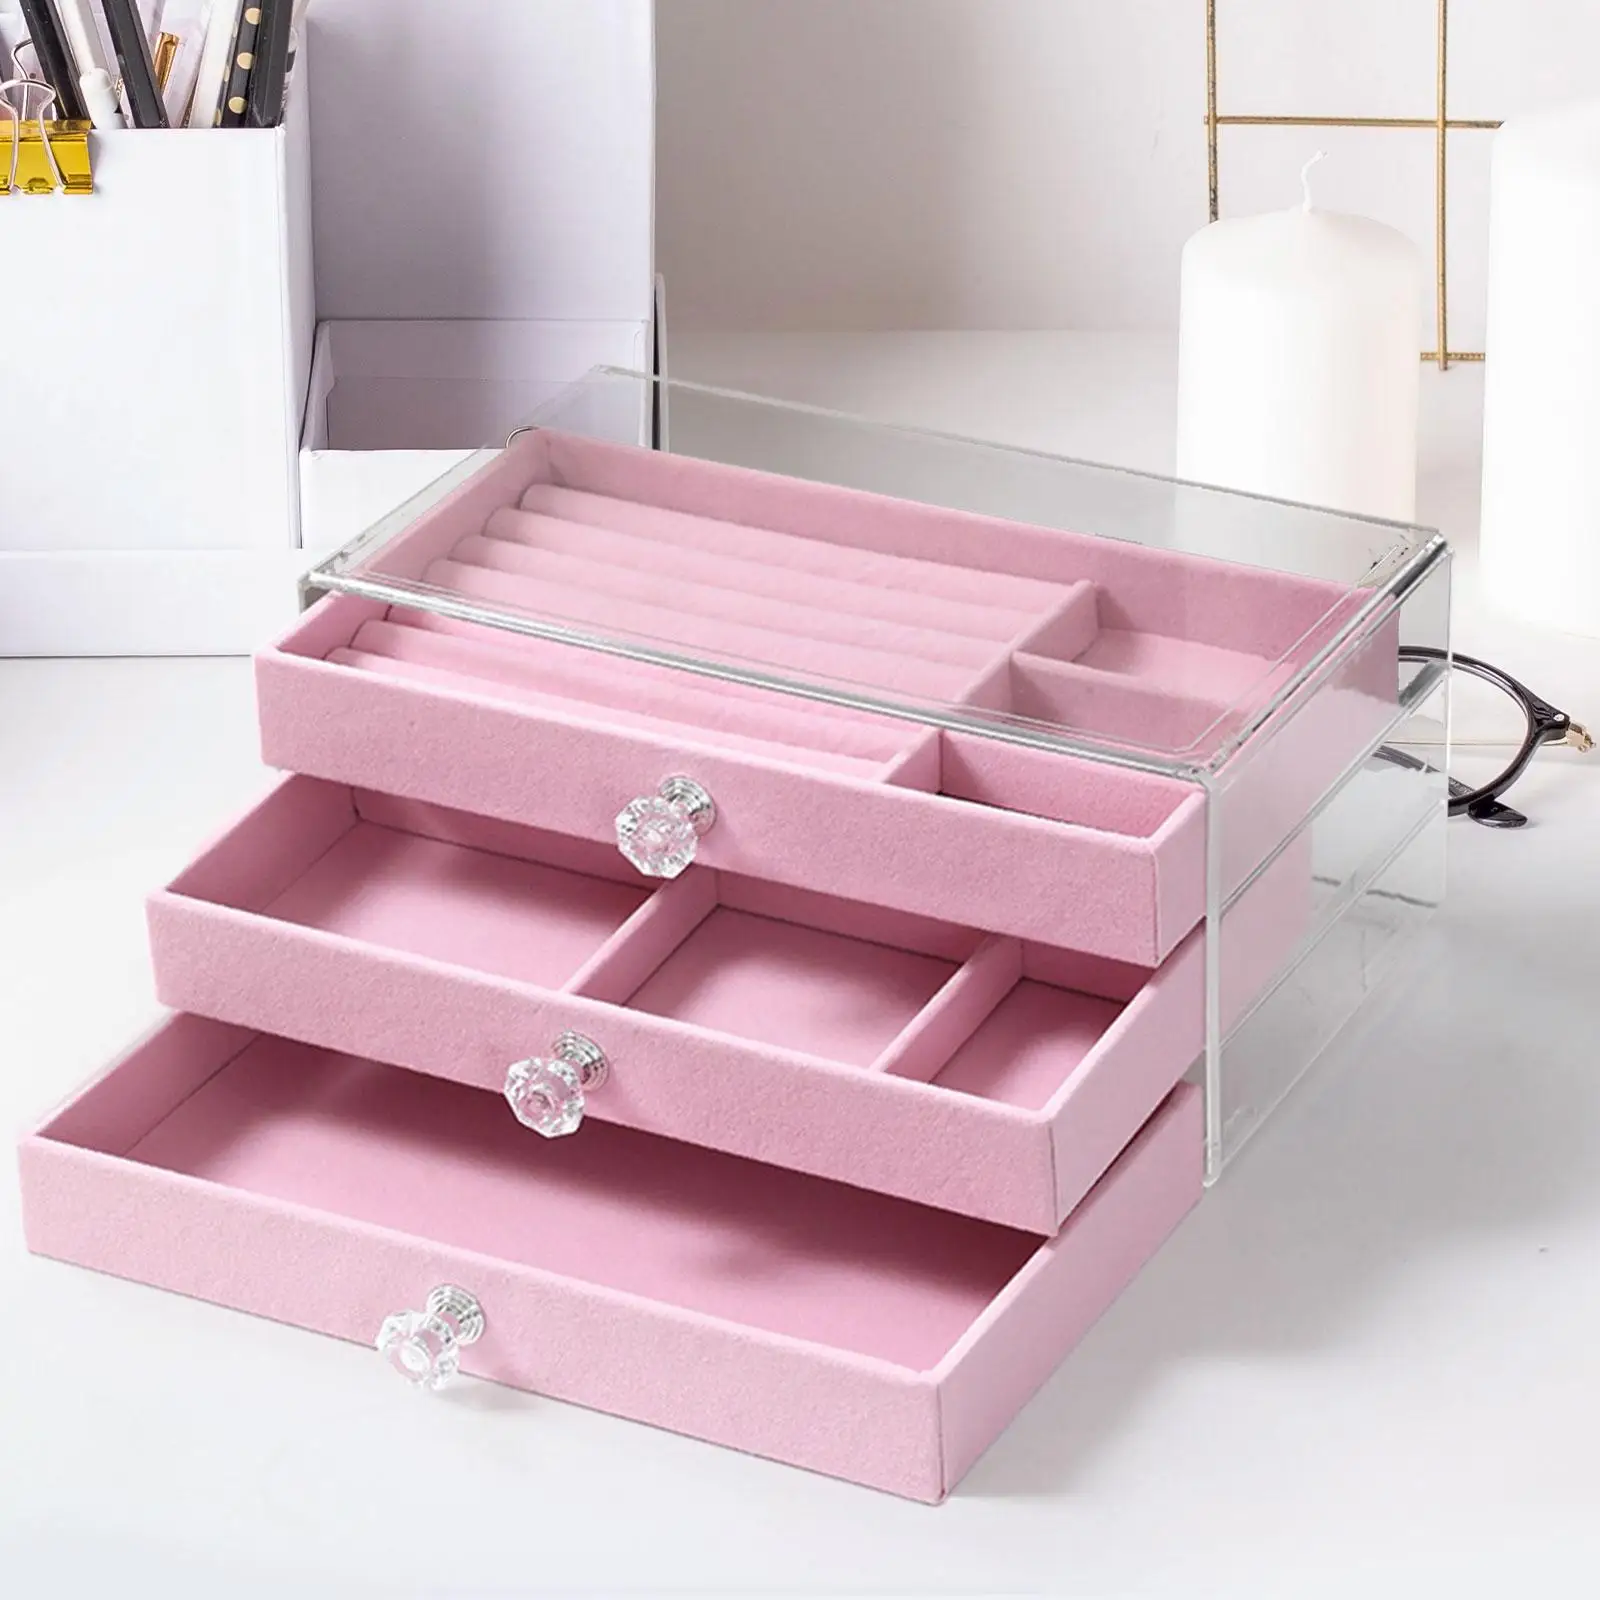 Portable Jewelry Box Acrylic Mirrored Rings Earrings Velvet Lined 3 Layer Jewelry Storage Box for Friends, Wife or Mother Gift